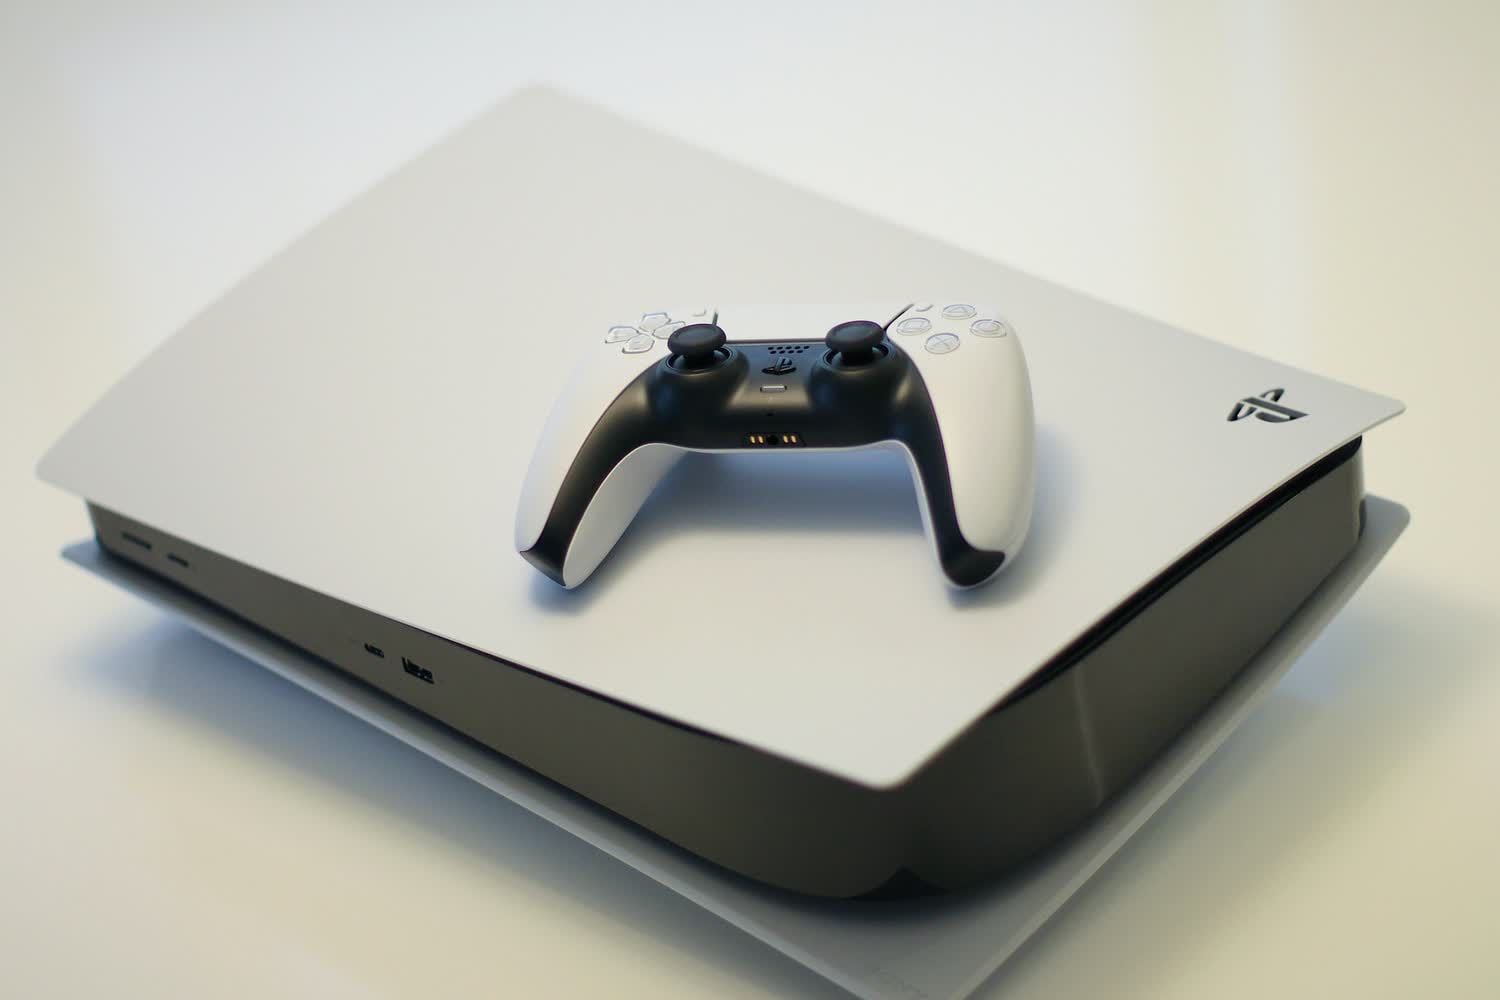 Sony's standard PS5 has become profitable, but the Digital Edition is still being sold at a loss